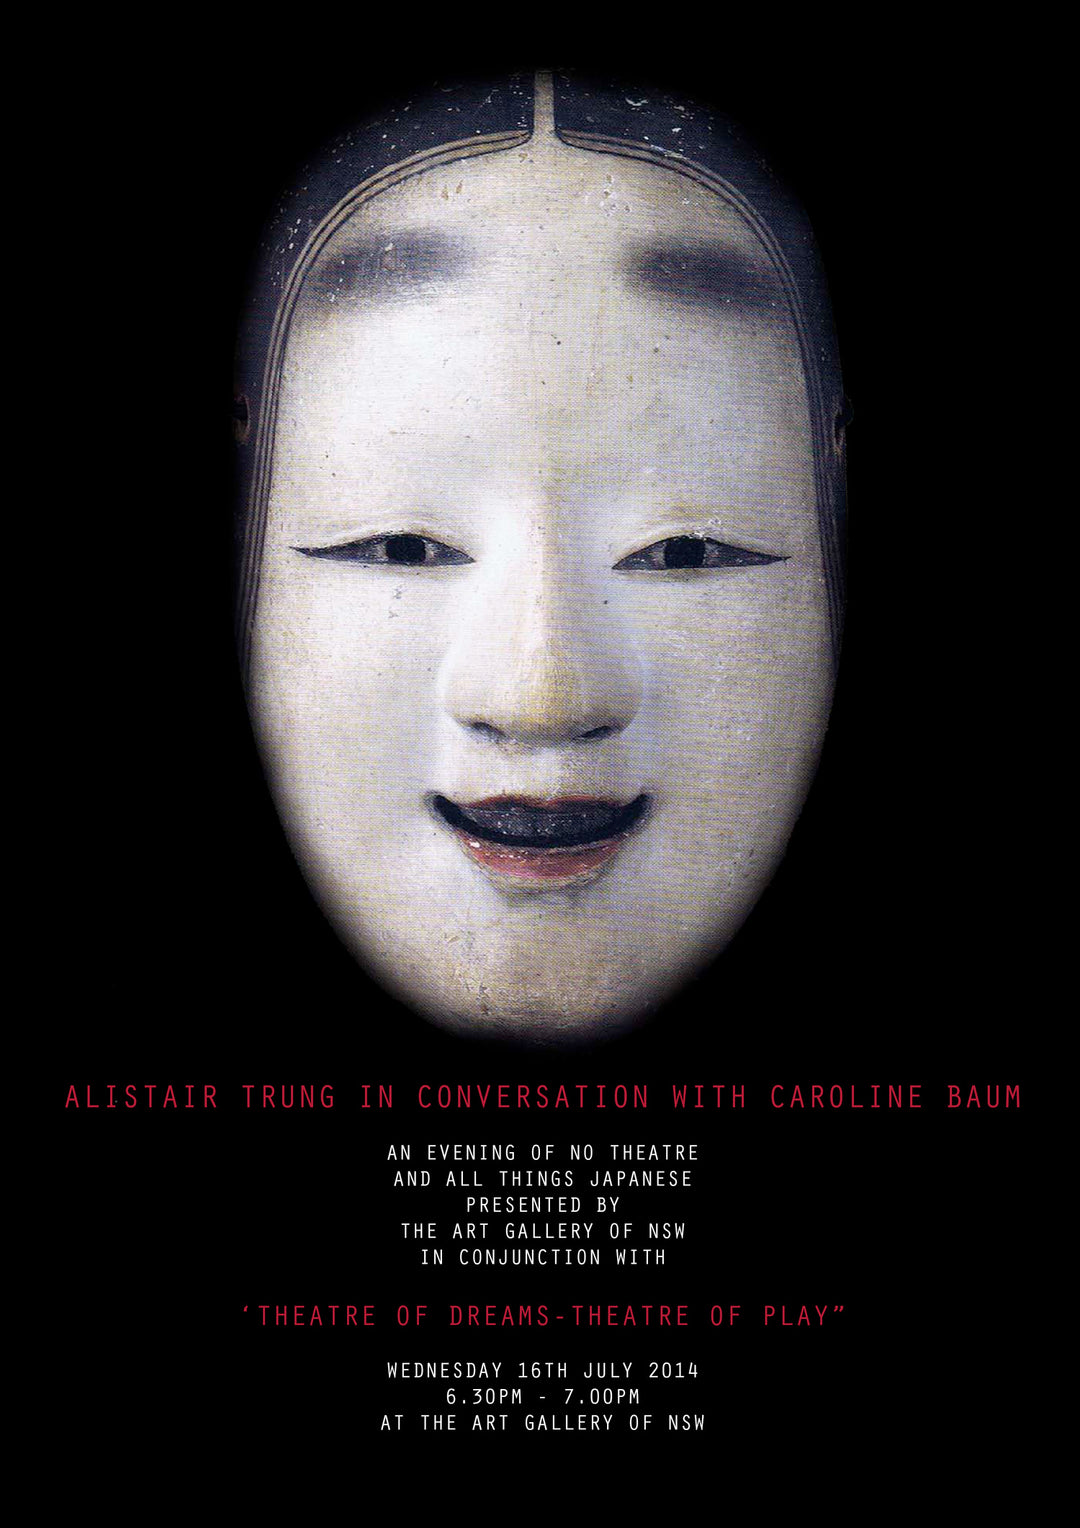 ALISTAIR TRUNG in conversation with CAROLINE BAUM, presented by THE ART GALLERY OF NSW